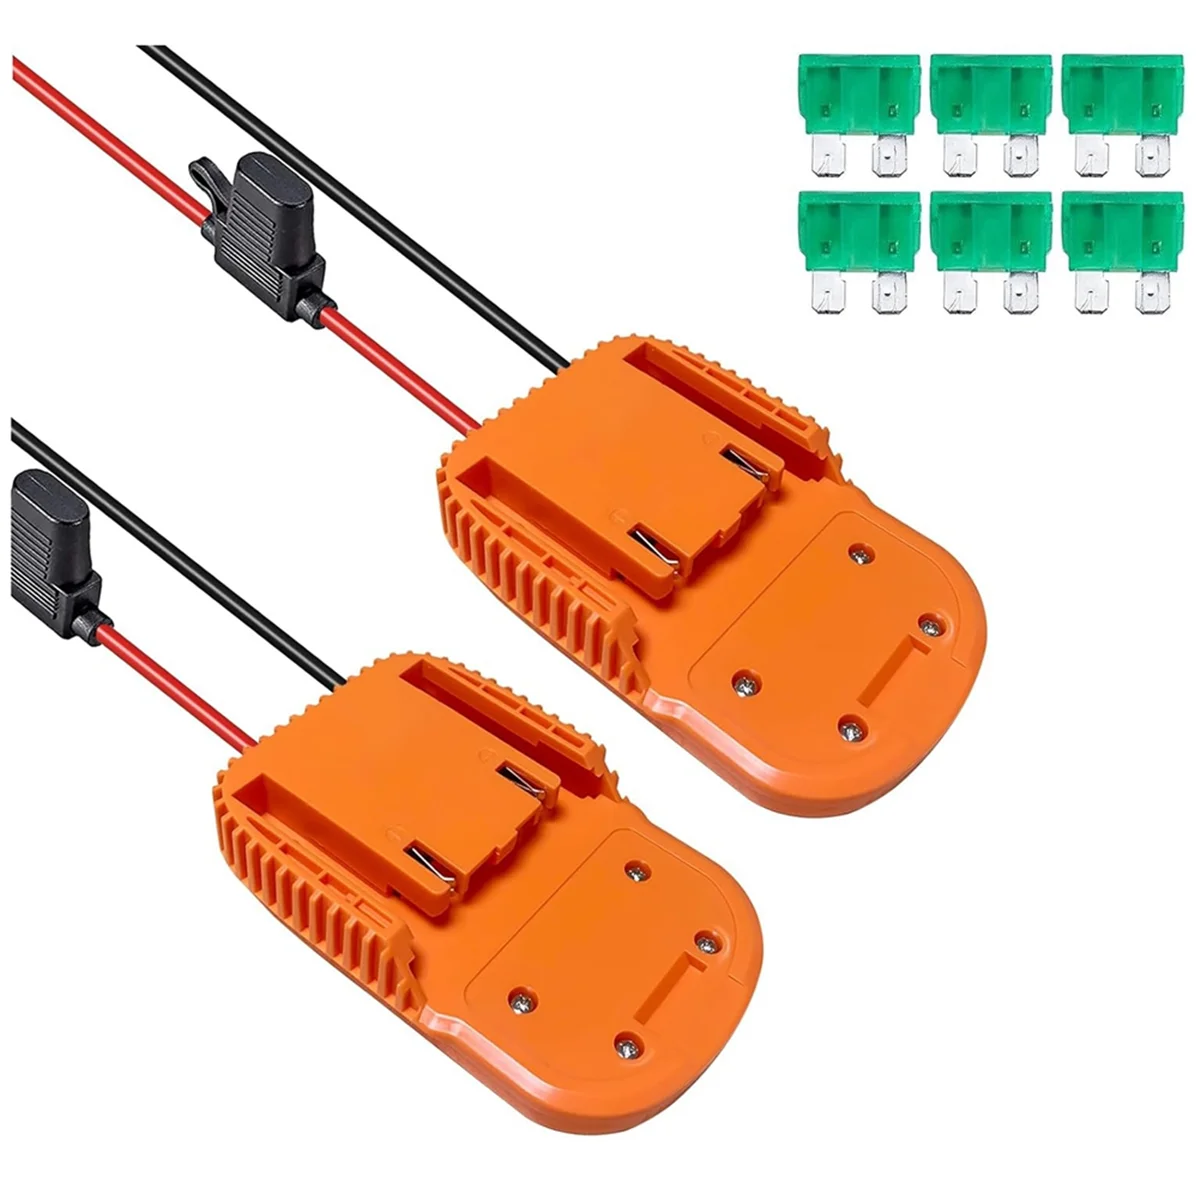 

2PCS Power Wheels Adapter for Ridgid AEG 18V Hyper Battery Dock Power Connector for DIY Rc Toy Car Truck A